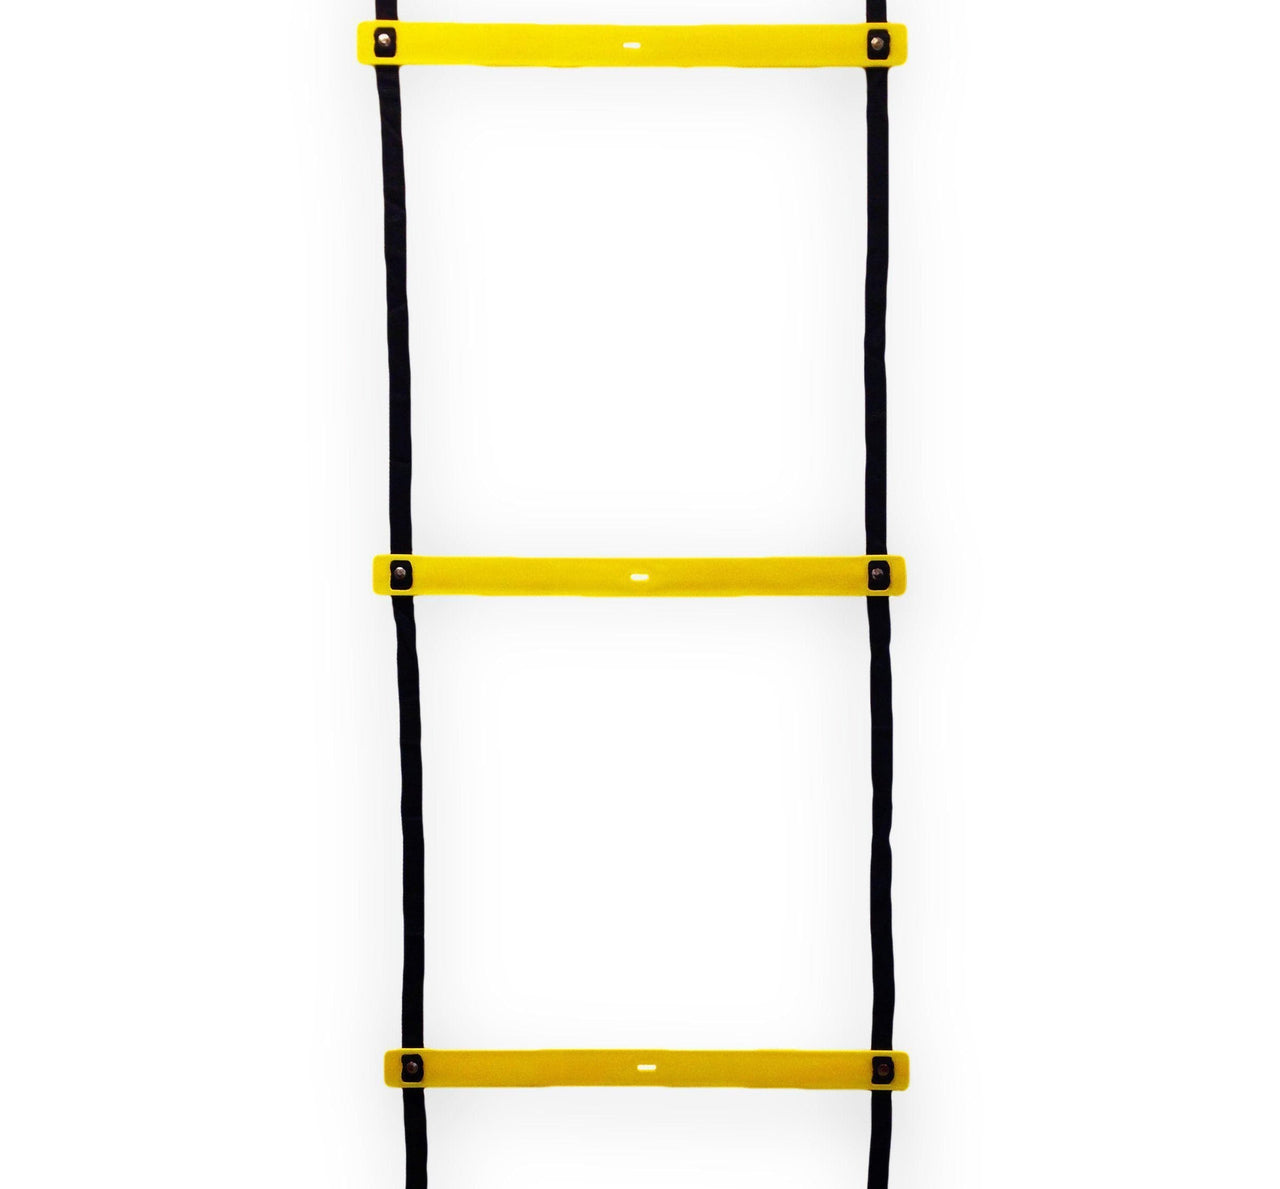 Heavy duty speed and agility ladder for football rugby soccer basketball and any sport. to increase athlete's ability to move fast in any direction for faster response time and direction change